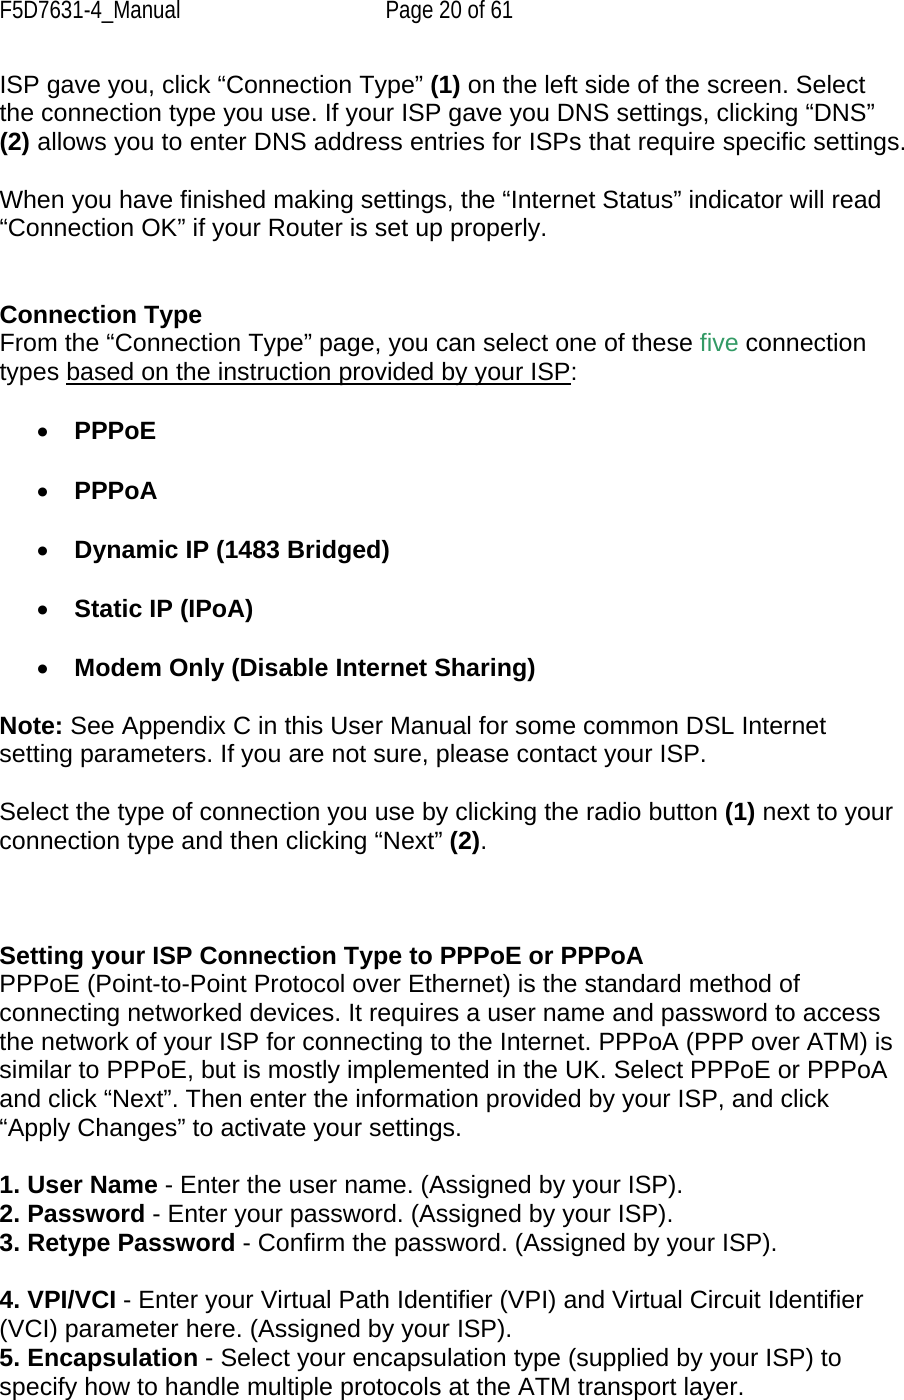 F5D7631-4_Manual  Page 20 of 61 ISP gave you, click “Connection Type” (1) on the left side of the screen. Select the connection type you use. If your ISP gave you DNS settings, clicking “DNS” (2) allows you to enter DNS address entries for ISPs that require specific settings.  When you have finished making settings, the “Internet Status” indicator will read “Connection OK” if your Router is set up properly.   Connection Type From the “Connection Type” page, you can select one of these five connection types based on the instruction provided by your ISP:  •  PPPoE  •  PPPoA   •  Dynamic IP (1483 Bridged)   •  Static IP (IPoA)   •  Modem Only (Disable Internet Sharing)  Note: See Appendix C in this User Manual for some common DSL Internet setting parameters. If you are not sure, please contact your ISP.  Select the type of connection you use by clicking the radio button (1) next to your connection type and then clicking “Next” (2).    Setting your ISP Connection Type to PPPoE or PPPoA PPPoE (Point-to-Point Protocol over Ethernet) is the standard method of connecting networked devices. It requires a user name and password to access the network of your ISP for connecting to the Internet. PPPoA (PPP over ATM) is similar to PPPoE, but is mostly implemented in the UK. Select PPPoE or PPPoA and click “Next”. Then enter the information provided by your ISP, and click “Apply Changes” to activate your settings.  1. User Name - Enter the user name. (Assigned by your ISP). 2. Password - Enter your password. (Assigned by your ISP). 3. Retype Password - Confirm the password. (Assigned by your ISP).  4. VPI/VCI - Enter your Virtual Path Identifier (VPI) and Virtual Circuit Identifier (VCI) parameter here. (Assigned by your ISP). 5. Encapsulation - Select your encapsulation type (supplied by your ISP) to specify how to handle multiple protocols at the ATM transport layer. 